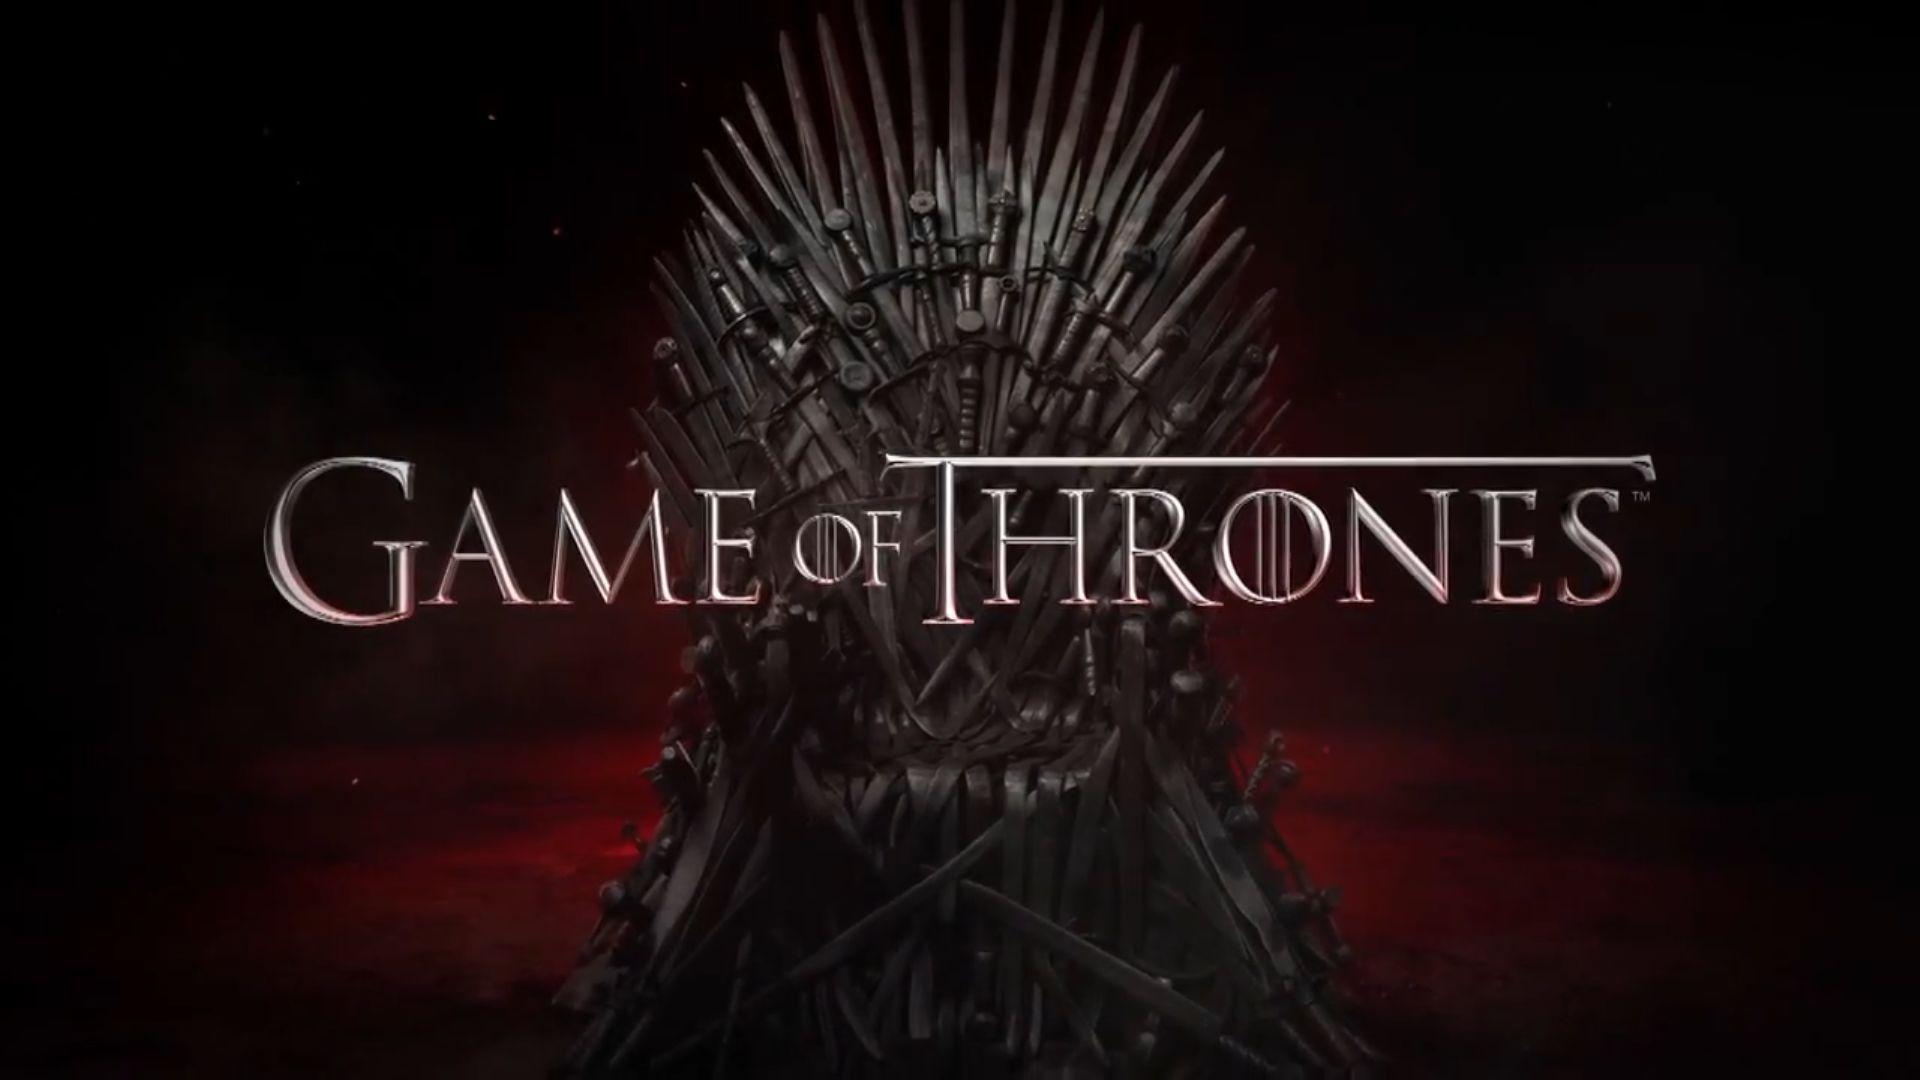 Wallpaper For > Game Of Thrones Iron Throne Wallpaper 1920x1080